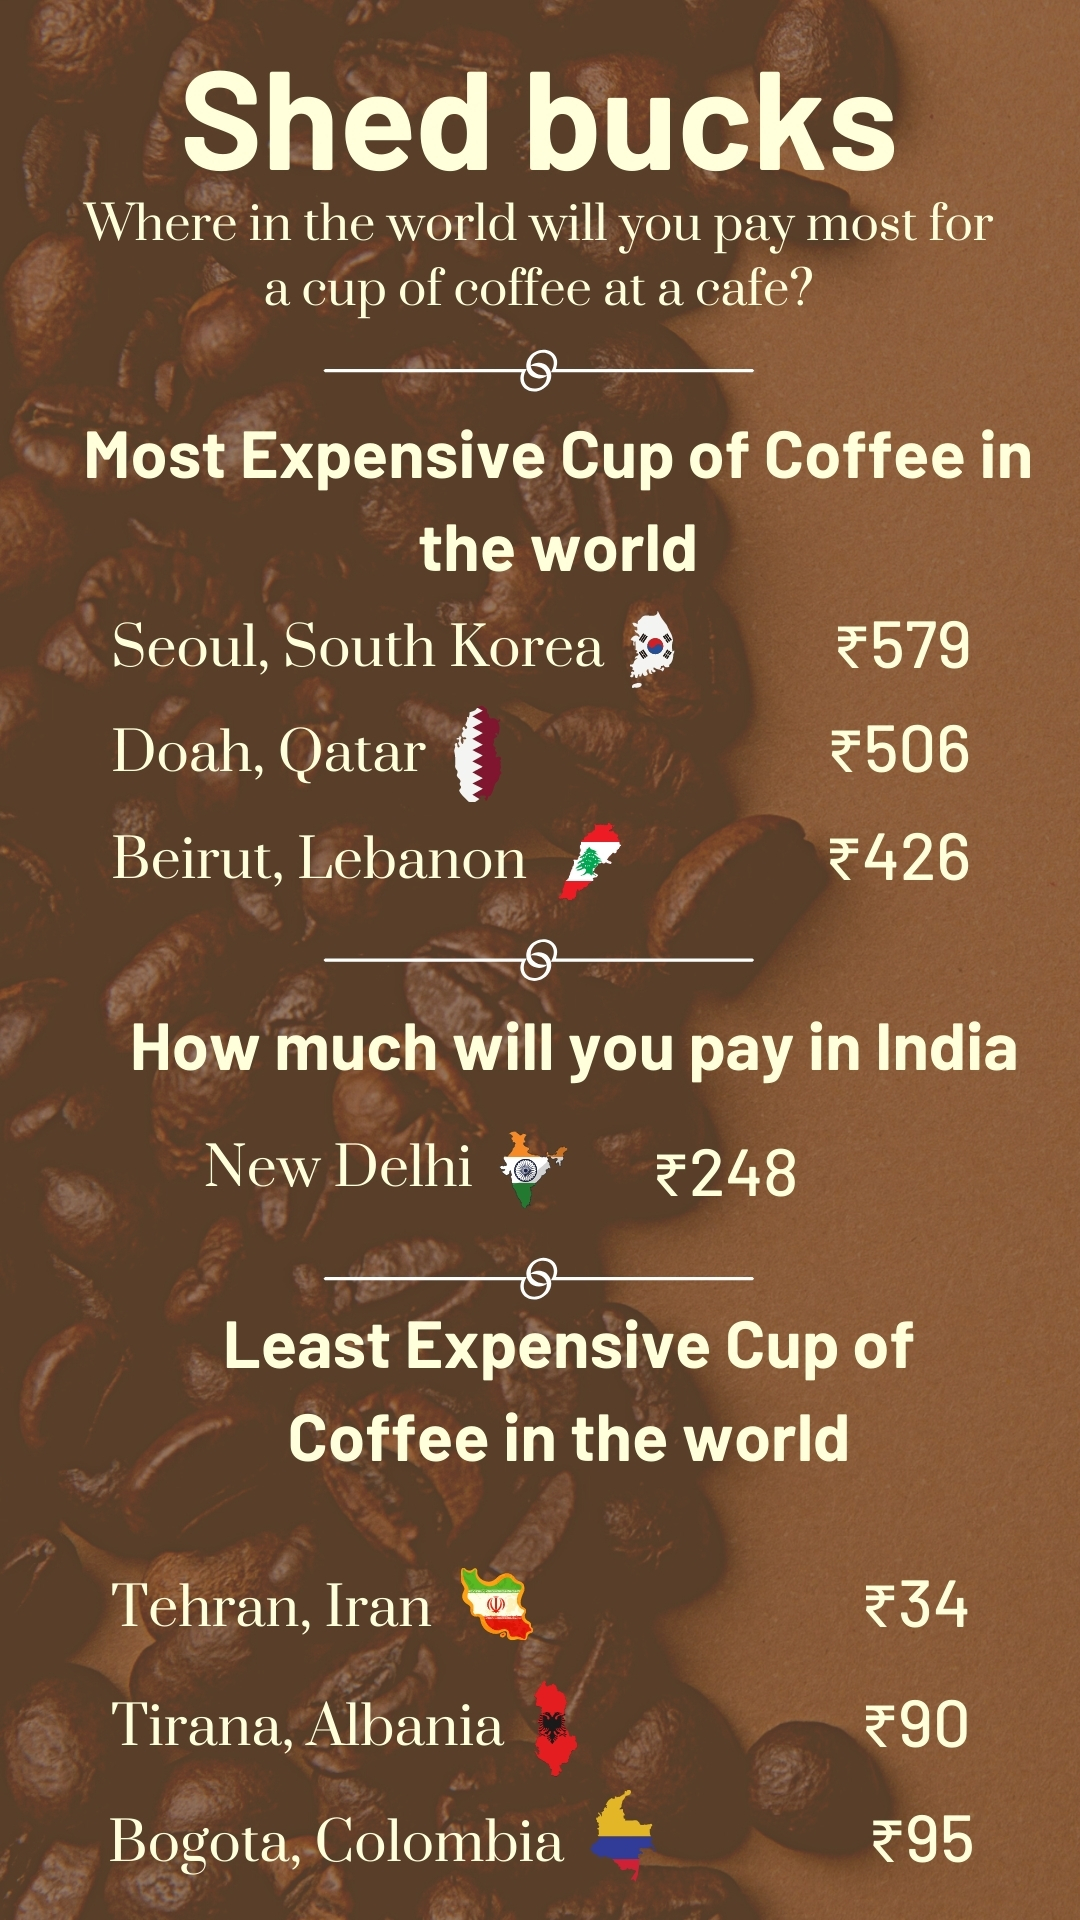 From Rs 579 in Seoul to Rs 34 in Tehran, here's how the world pays for a cup of joe